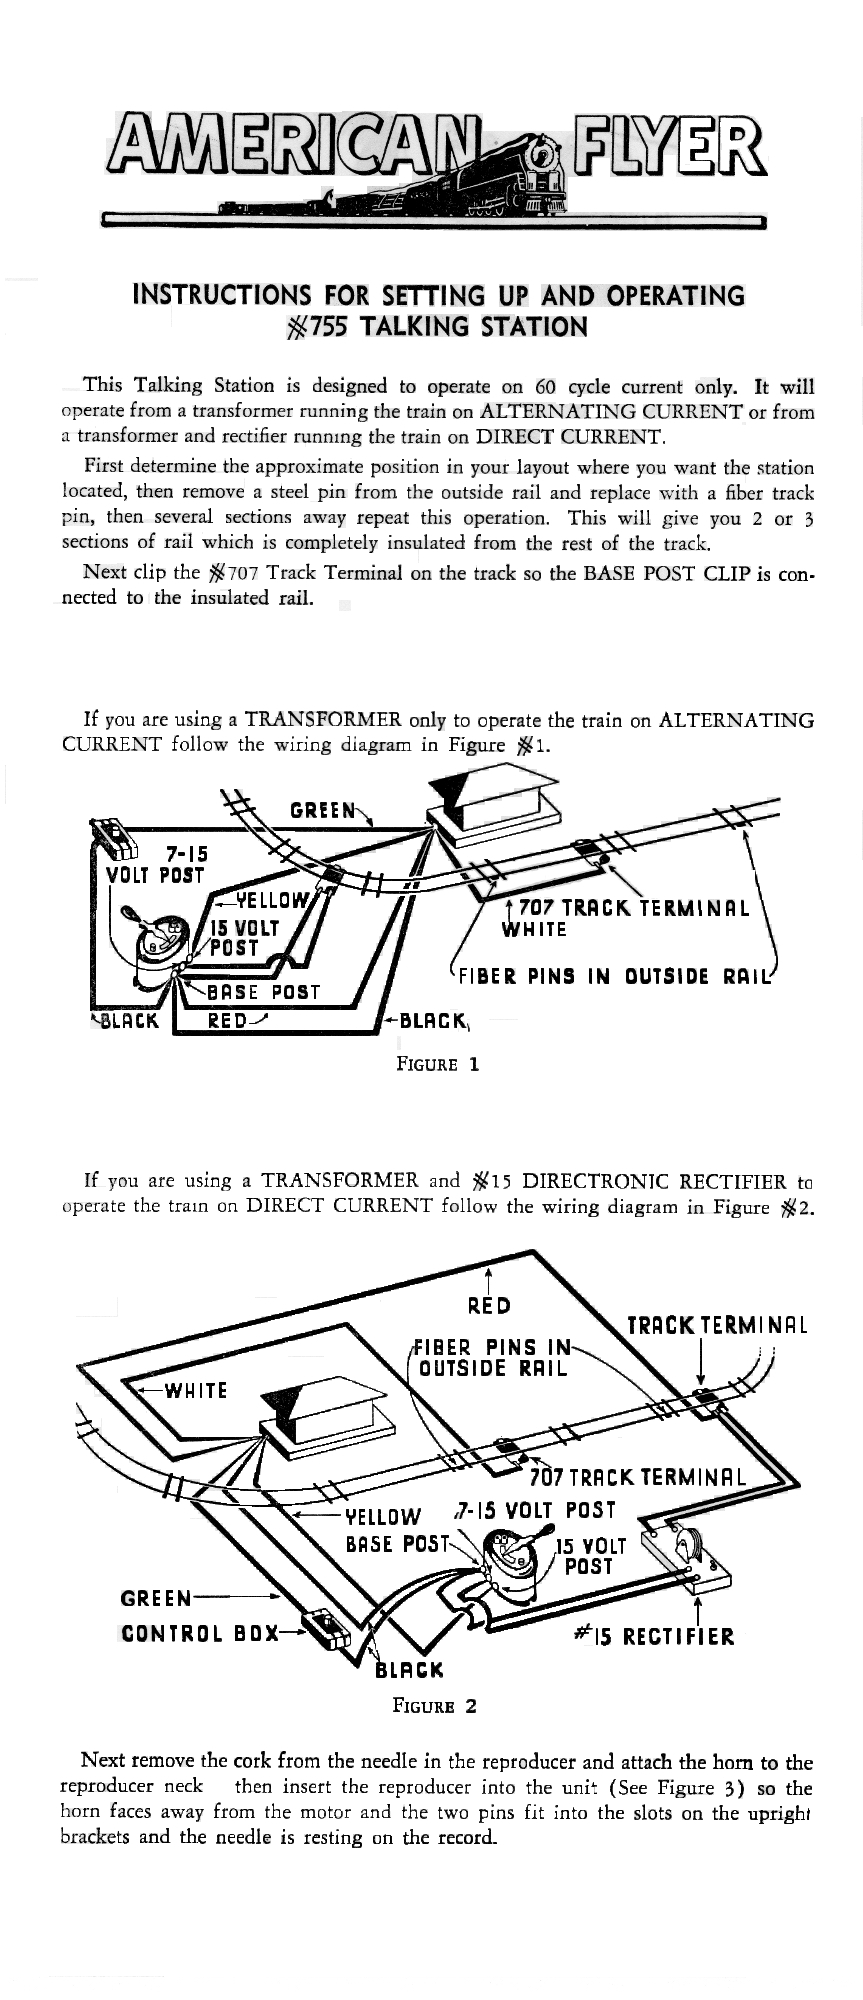 Instructions for Setting Up and Operating No. 755 Talking Station  - Page 1